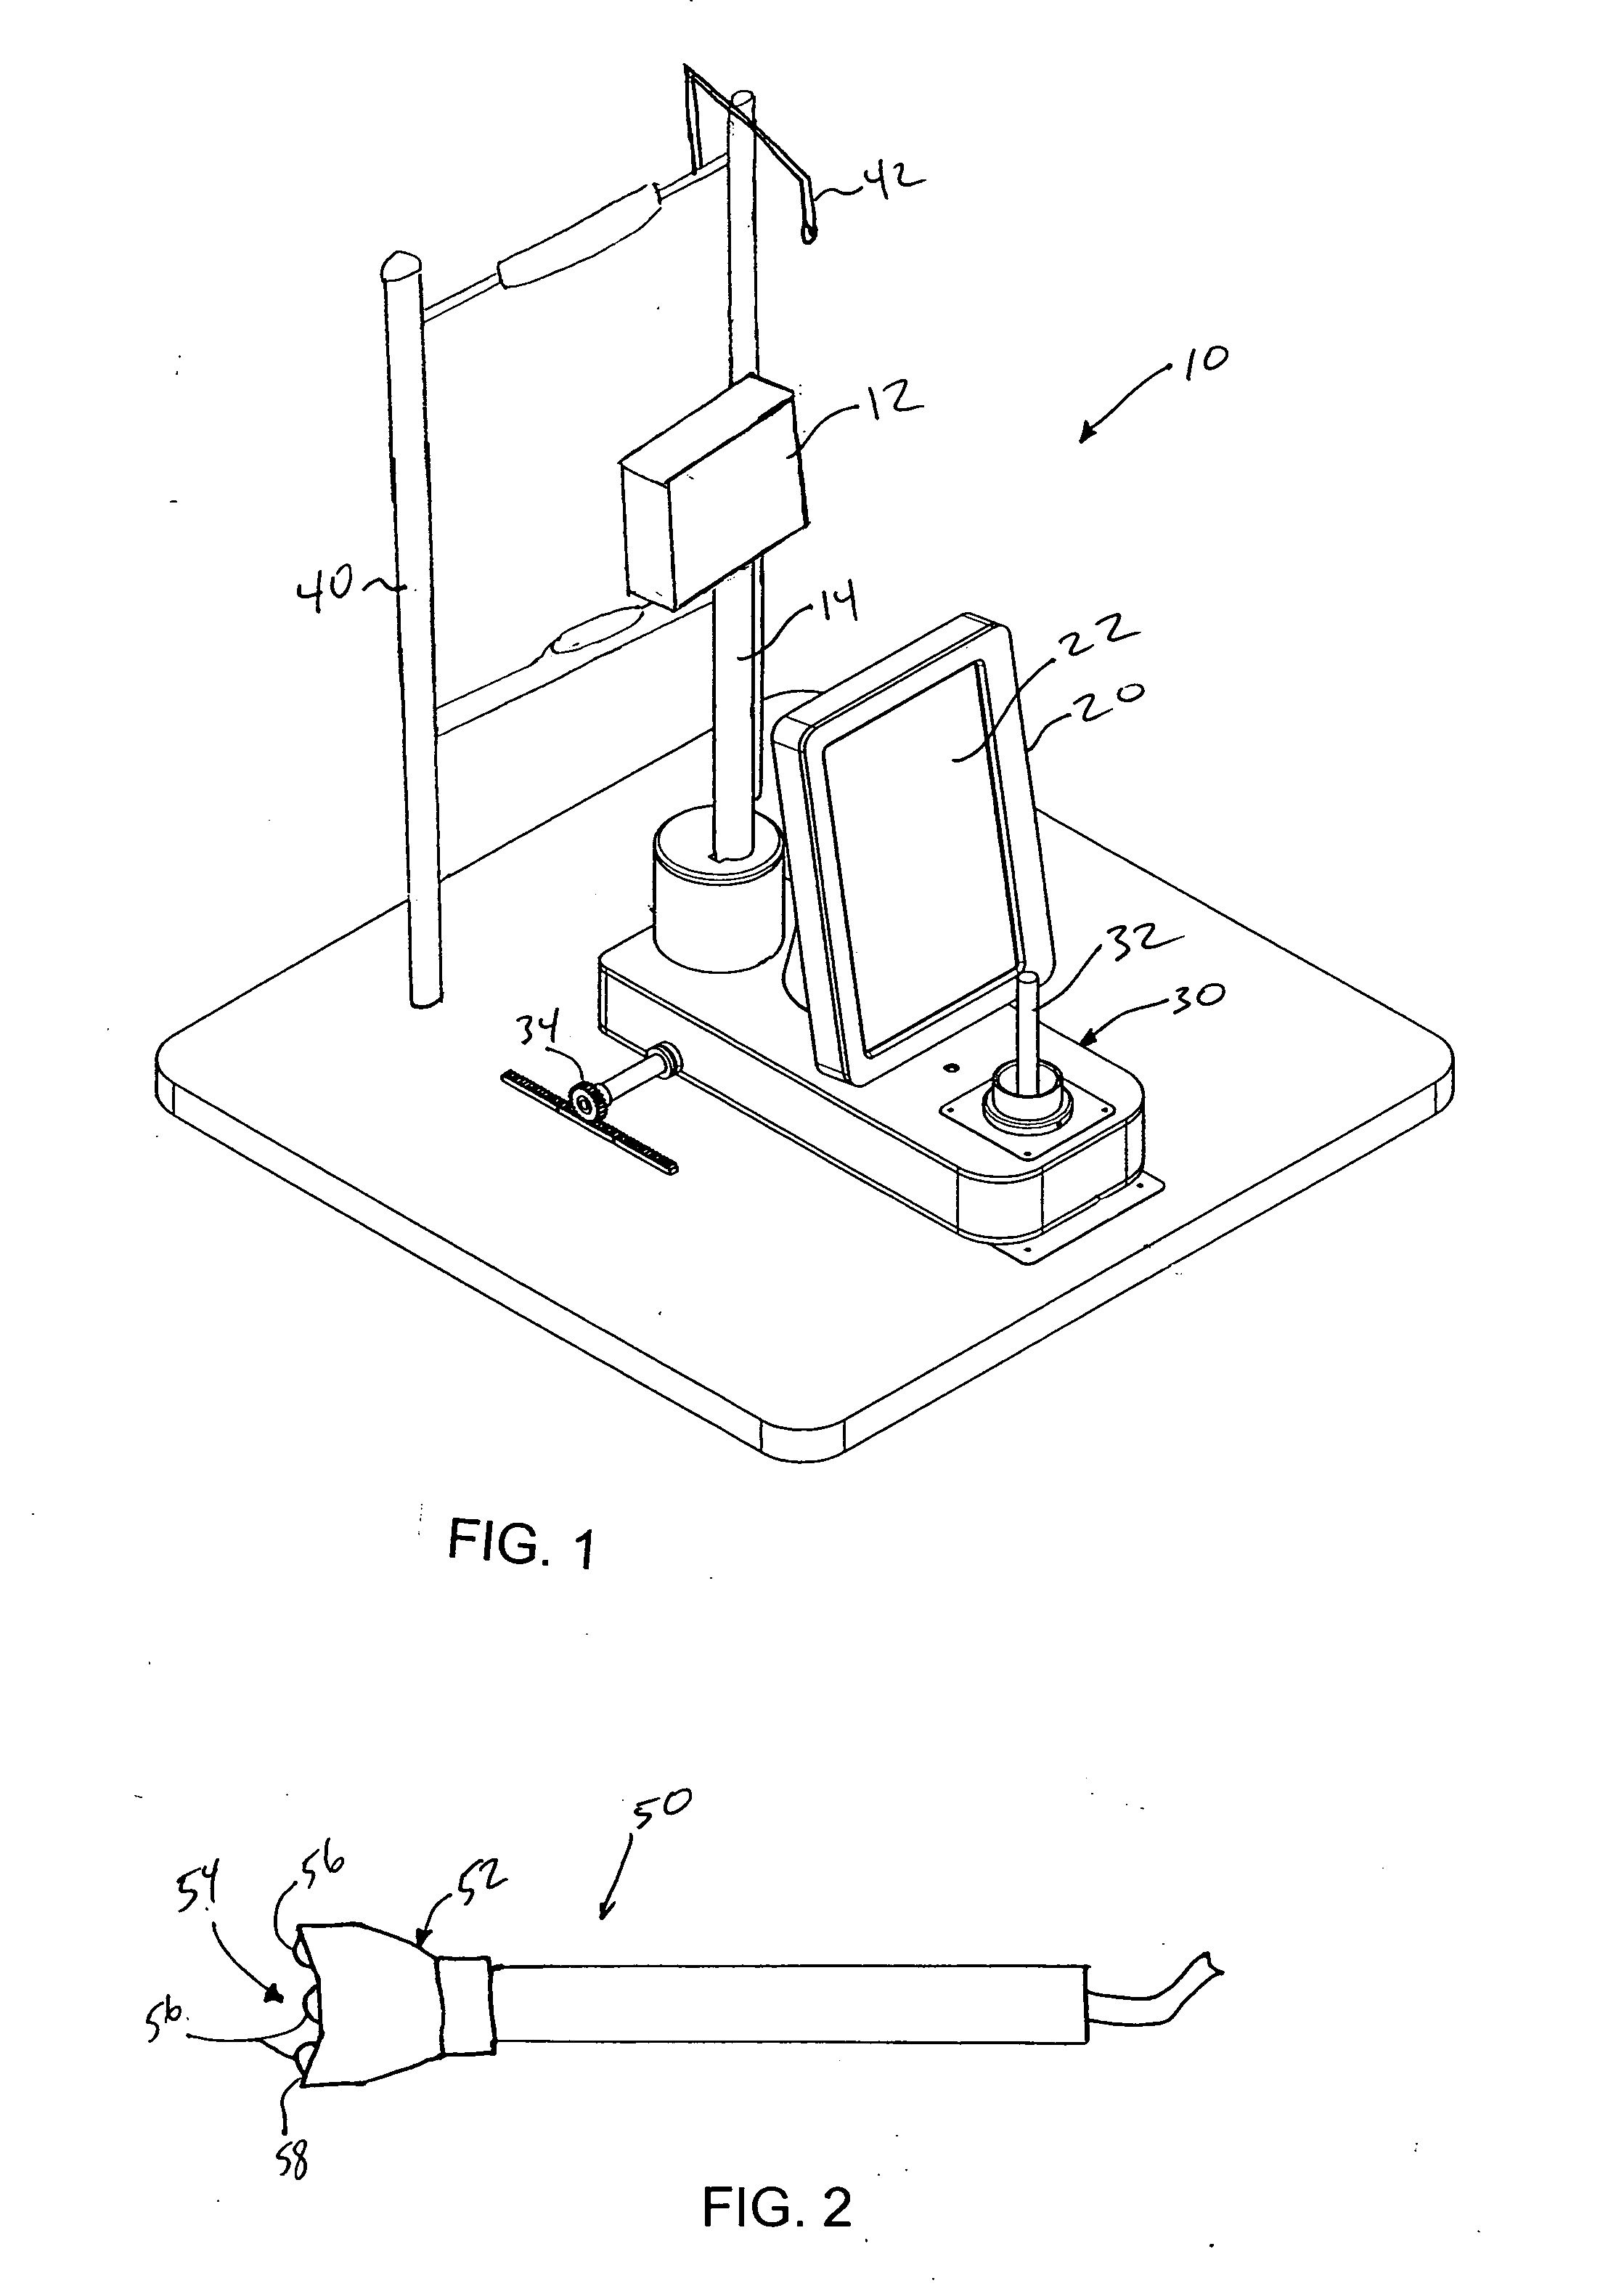 Method and apparatus for diagnosing conditions of the eye with infrared light